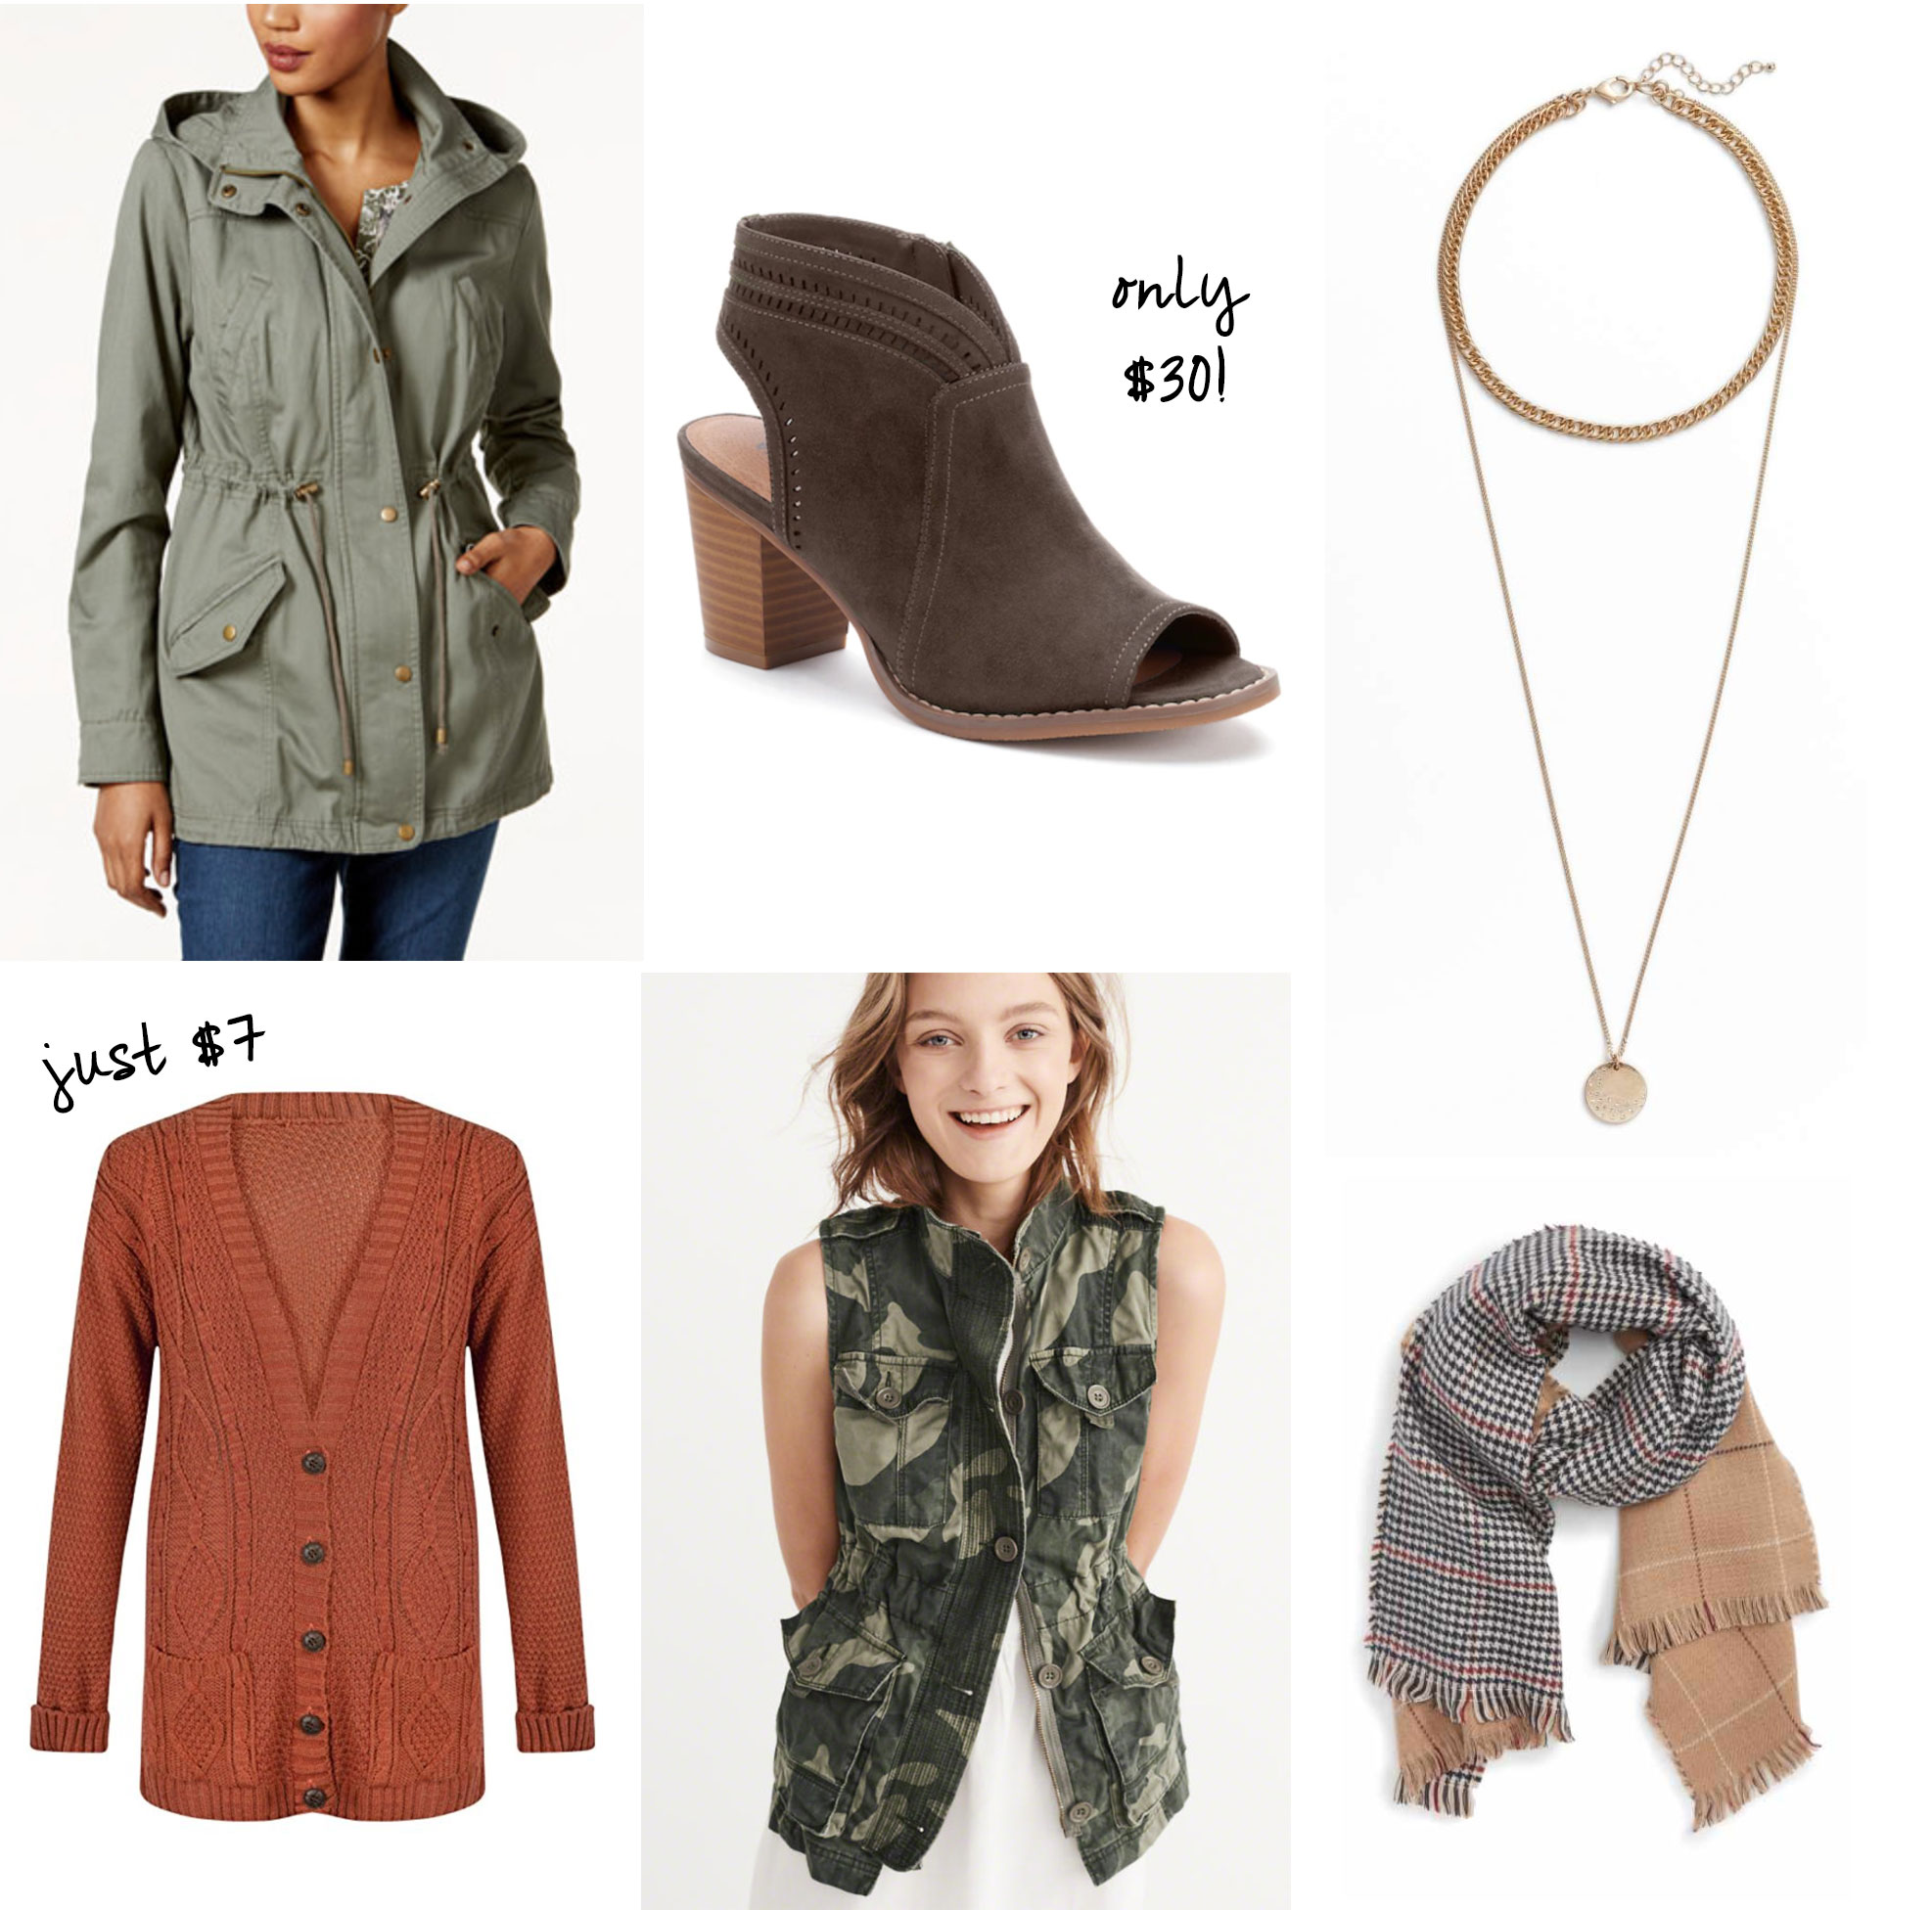 Fall fashion finds from $7!